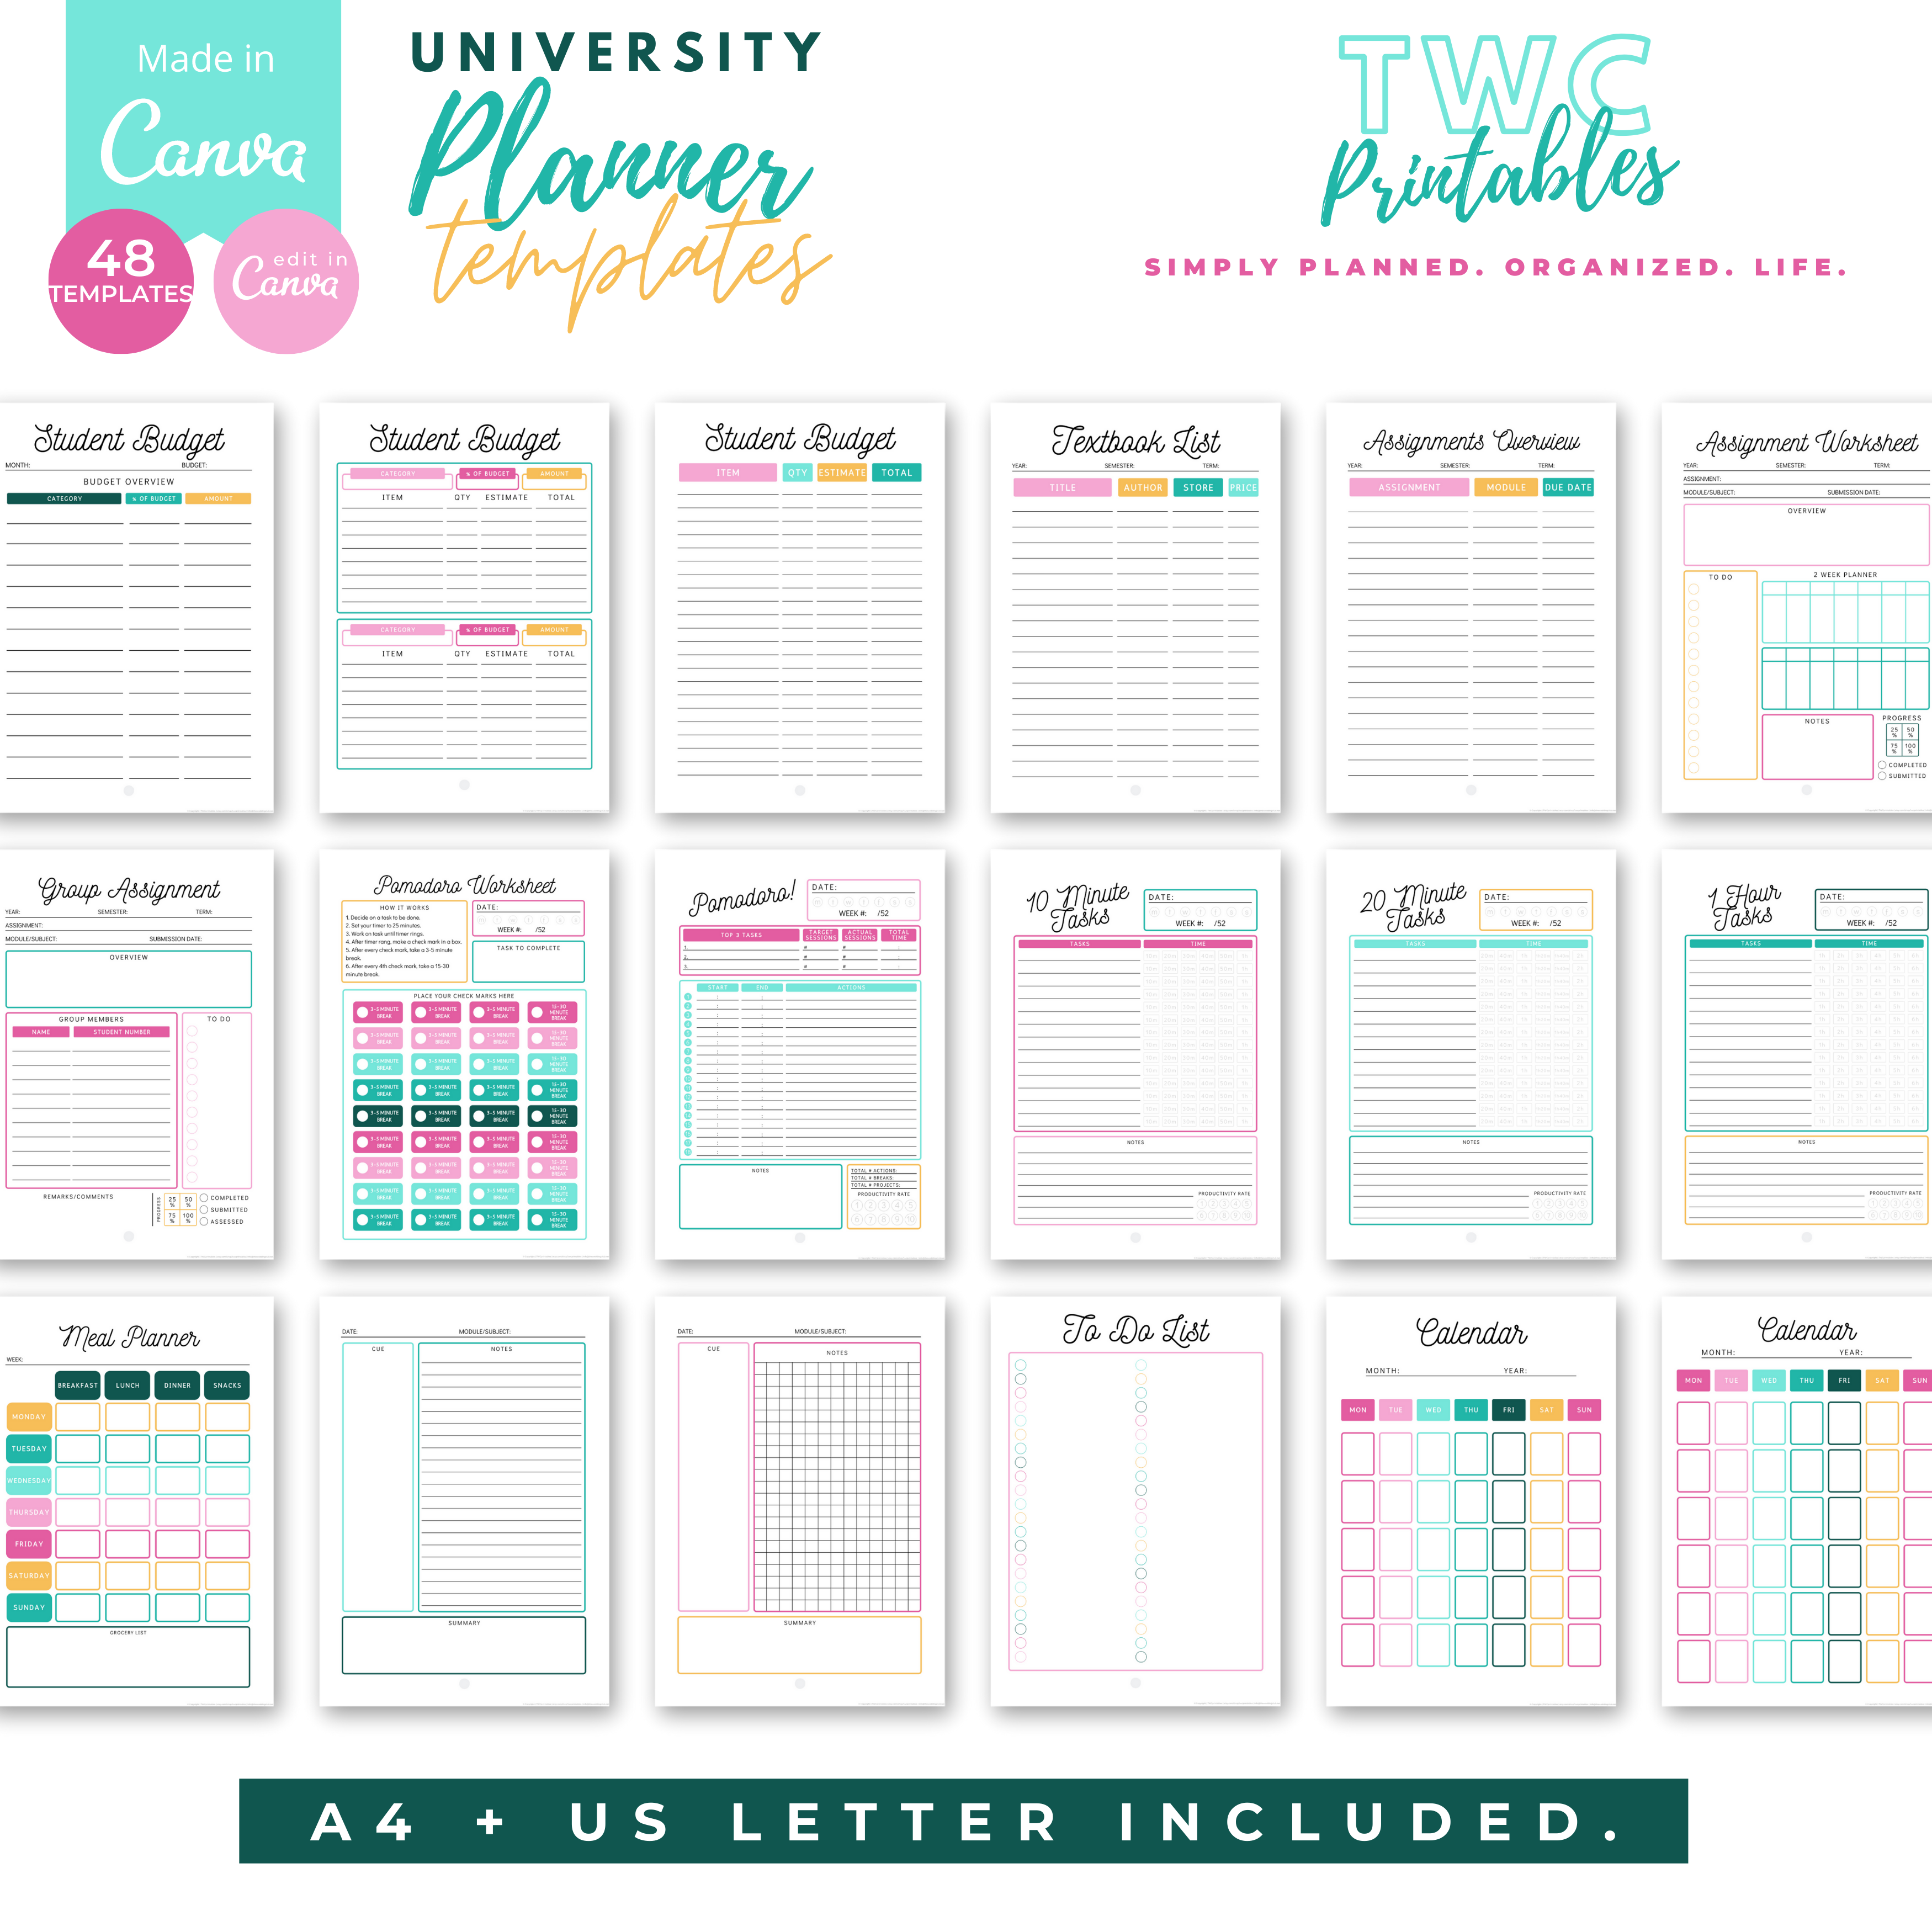 Plan out your student life with these editable university planner templates for Canva! Suitable for high school, college and university, these planner worksheets will help you to prep for exams, manage individual and group assignments, work with schedules, organize your study content and so much more! You can change everything from colors to fonts, text, elements, etc. all you need is a free Canva account.